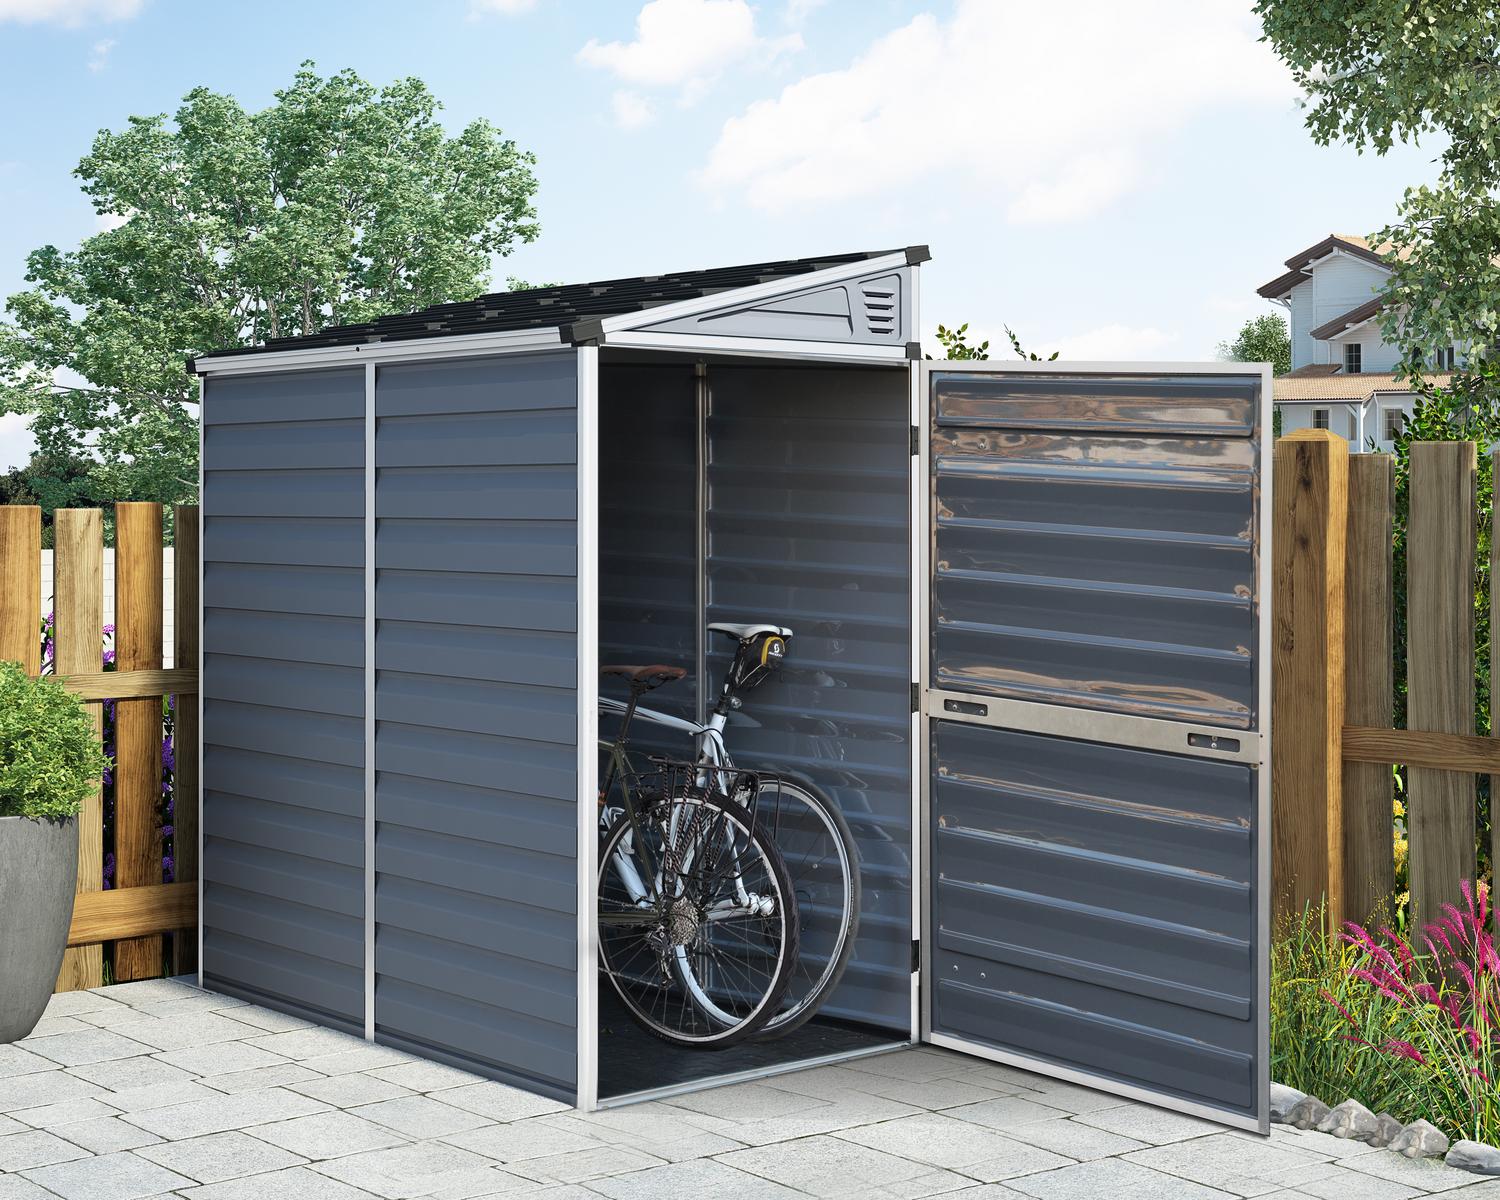 Plastic Garden Shed Pent 4 ft. x 6 ft. An open-door shed with gray polycarbonate panels and an aluminum frame is used to store a bike